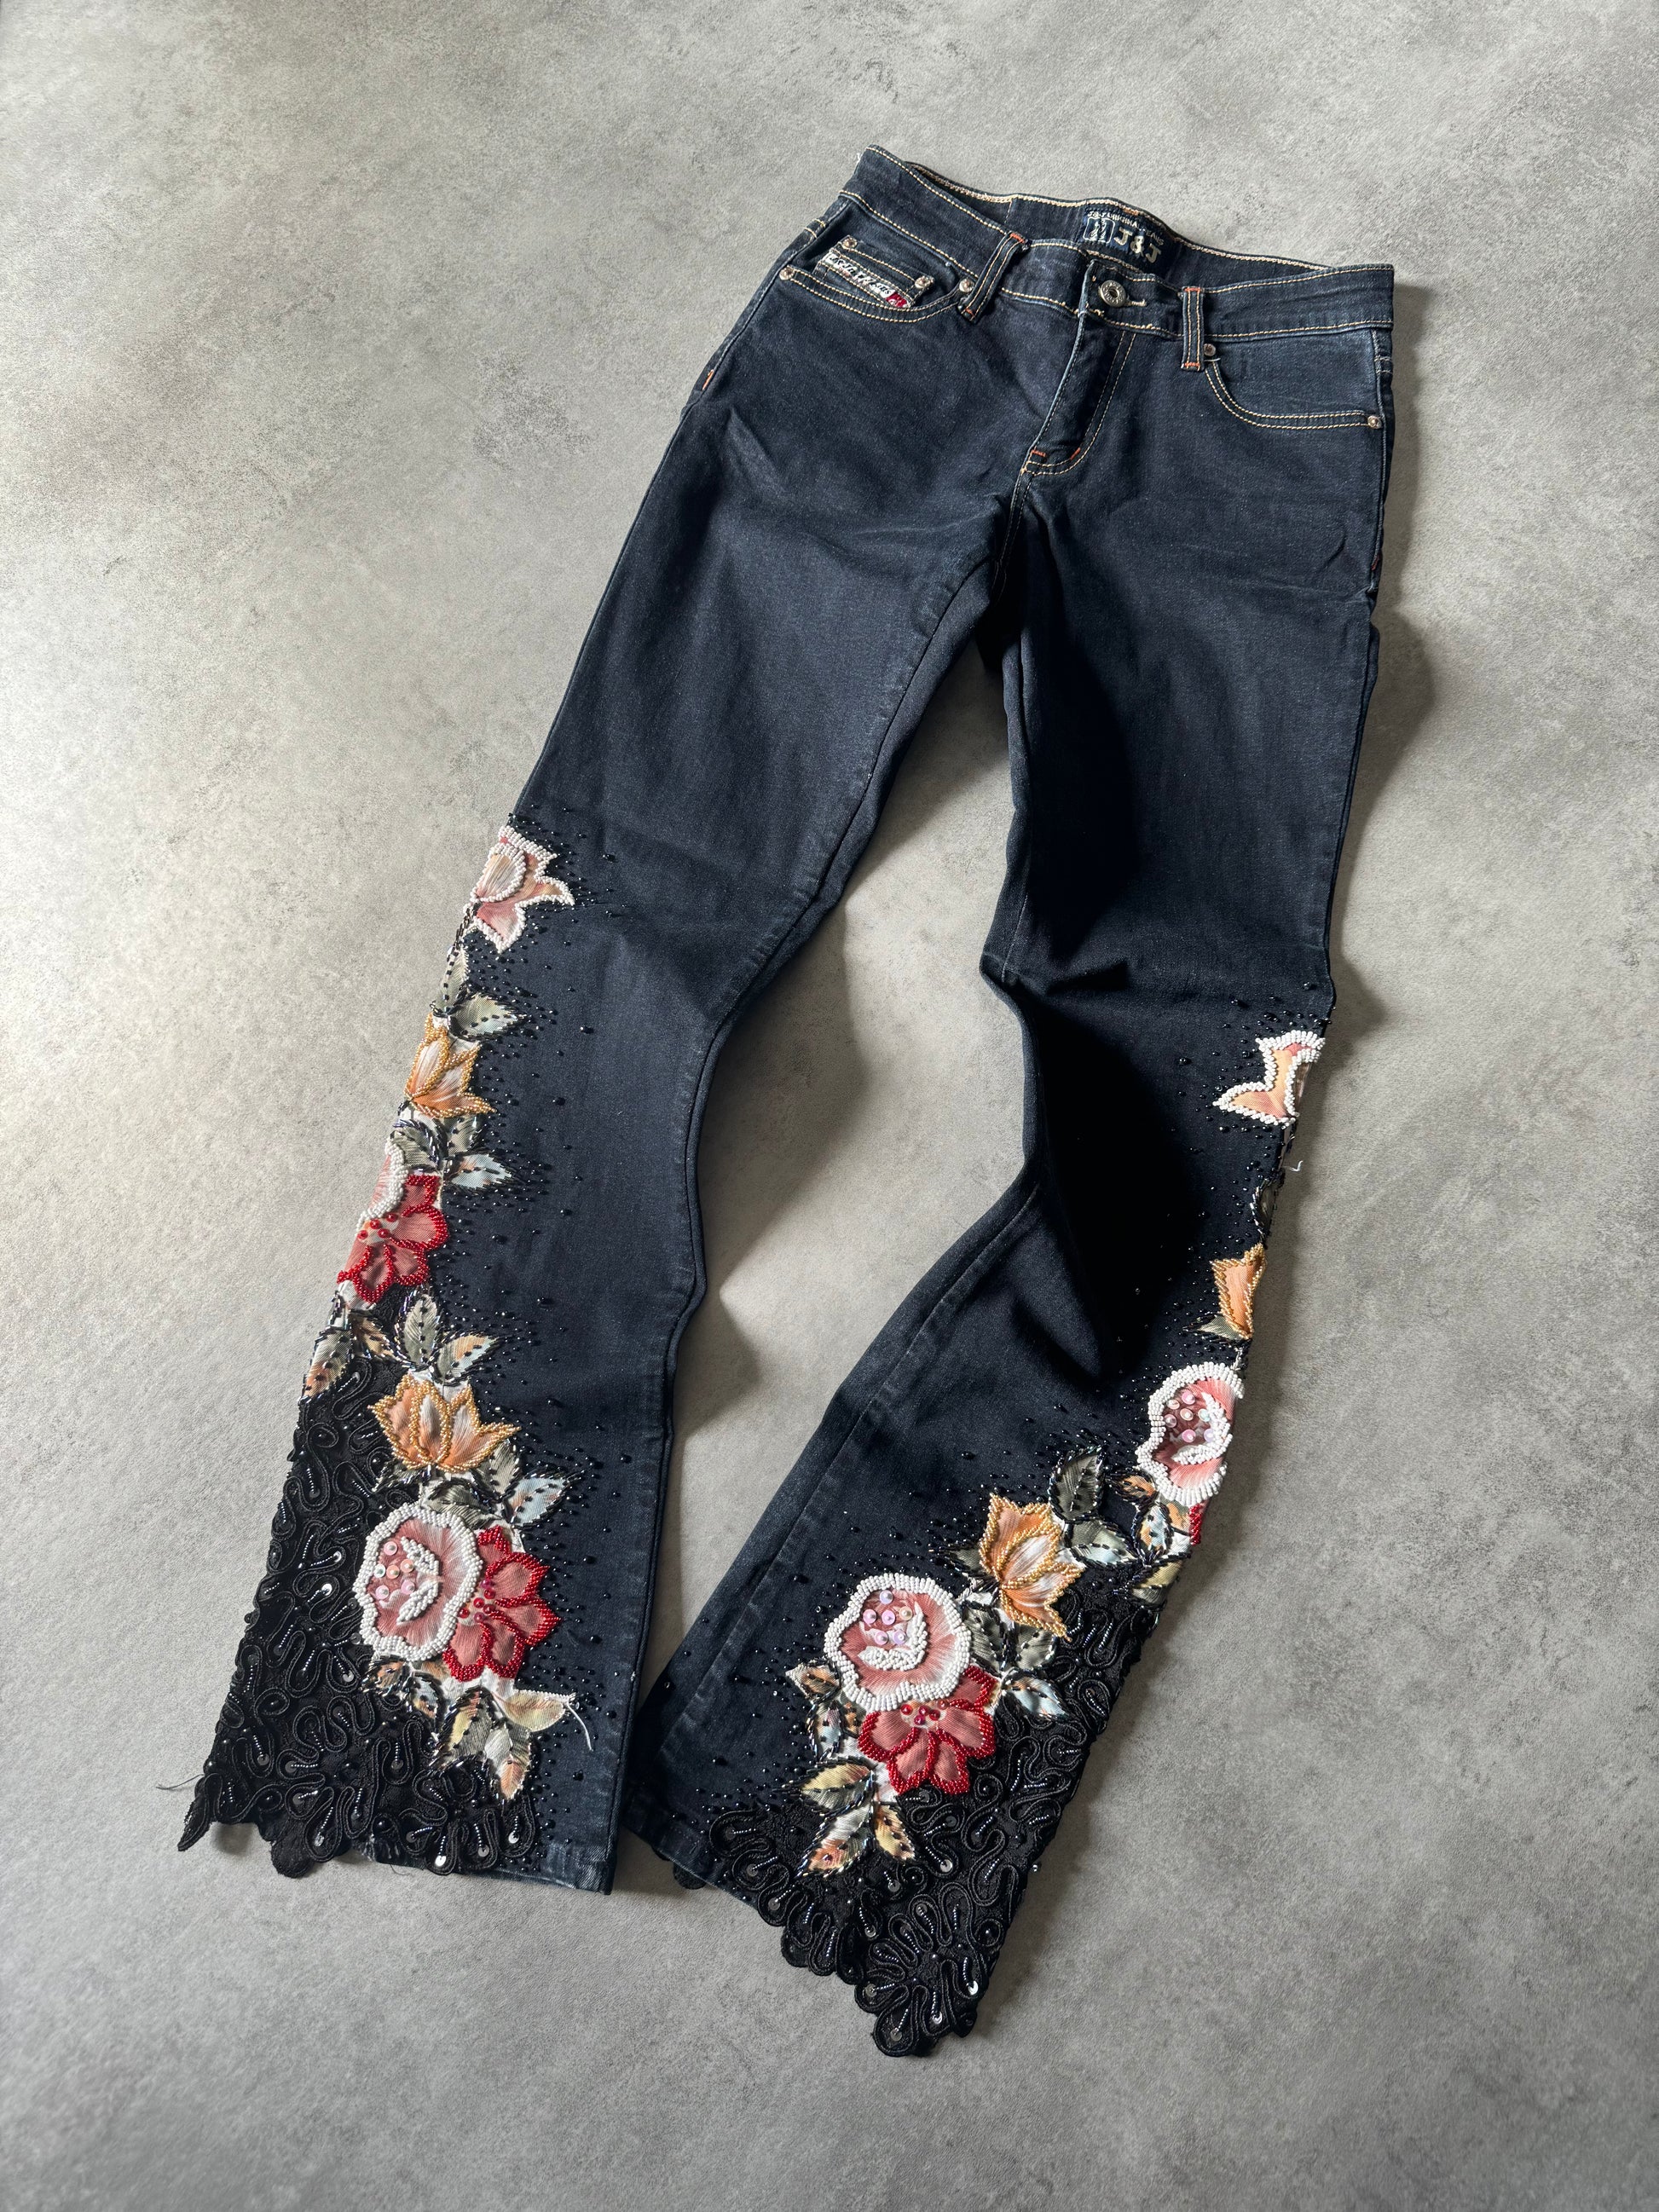 2000s J&J Cowboy Extra Embroidered Pants (XS) - 7